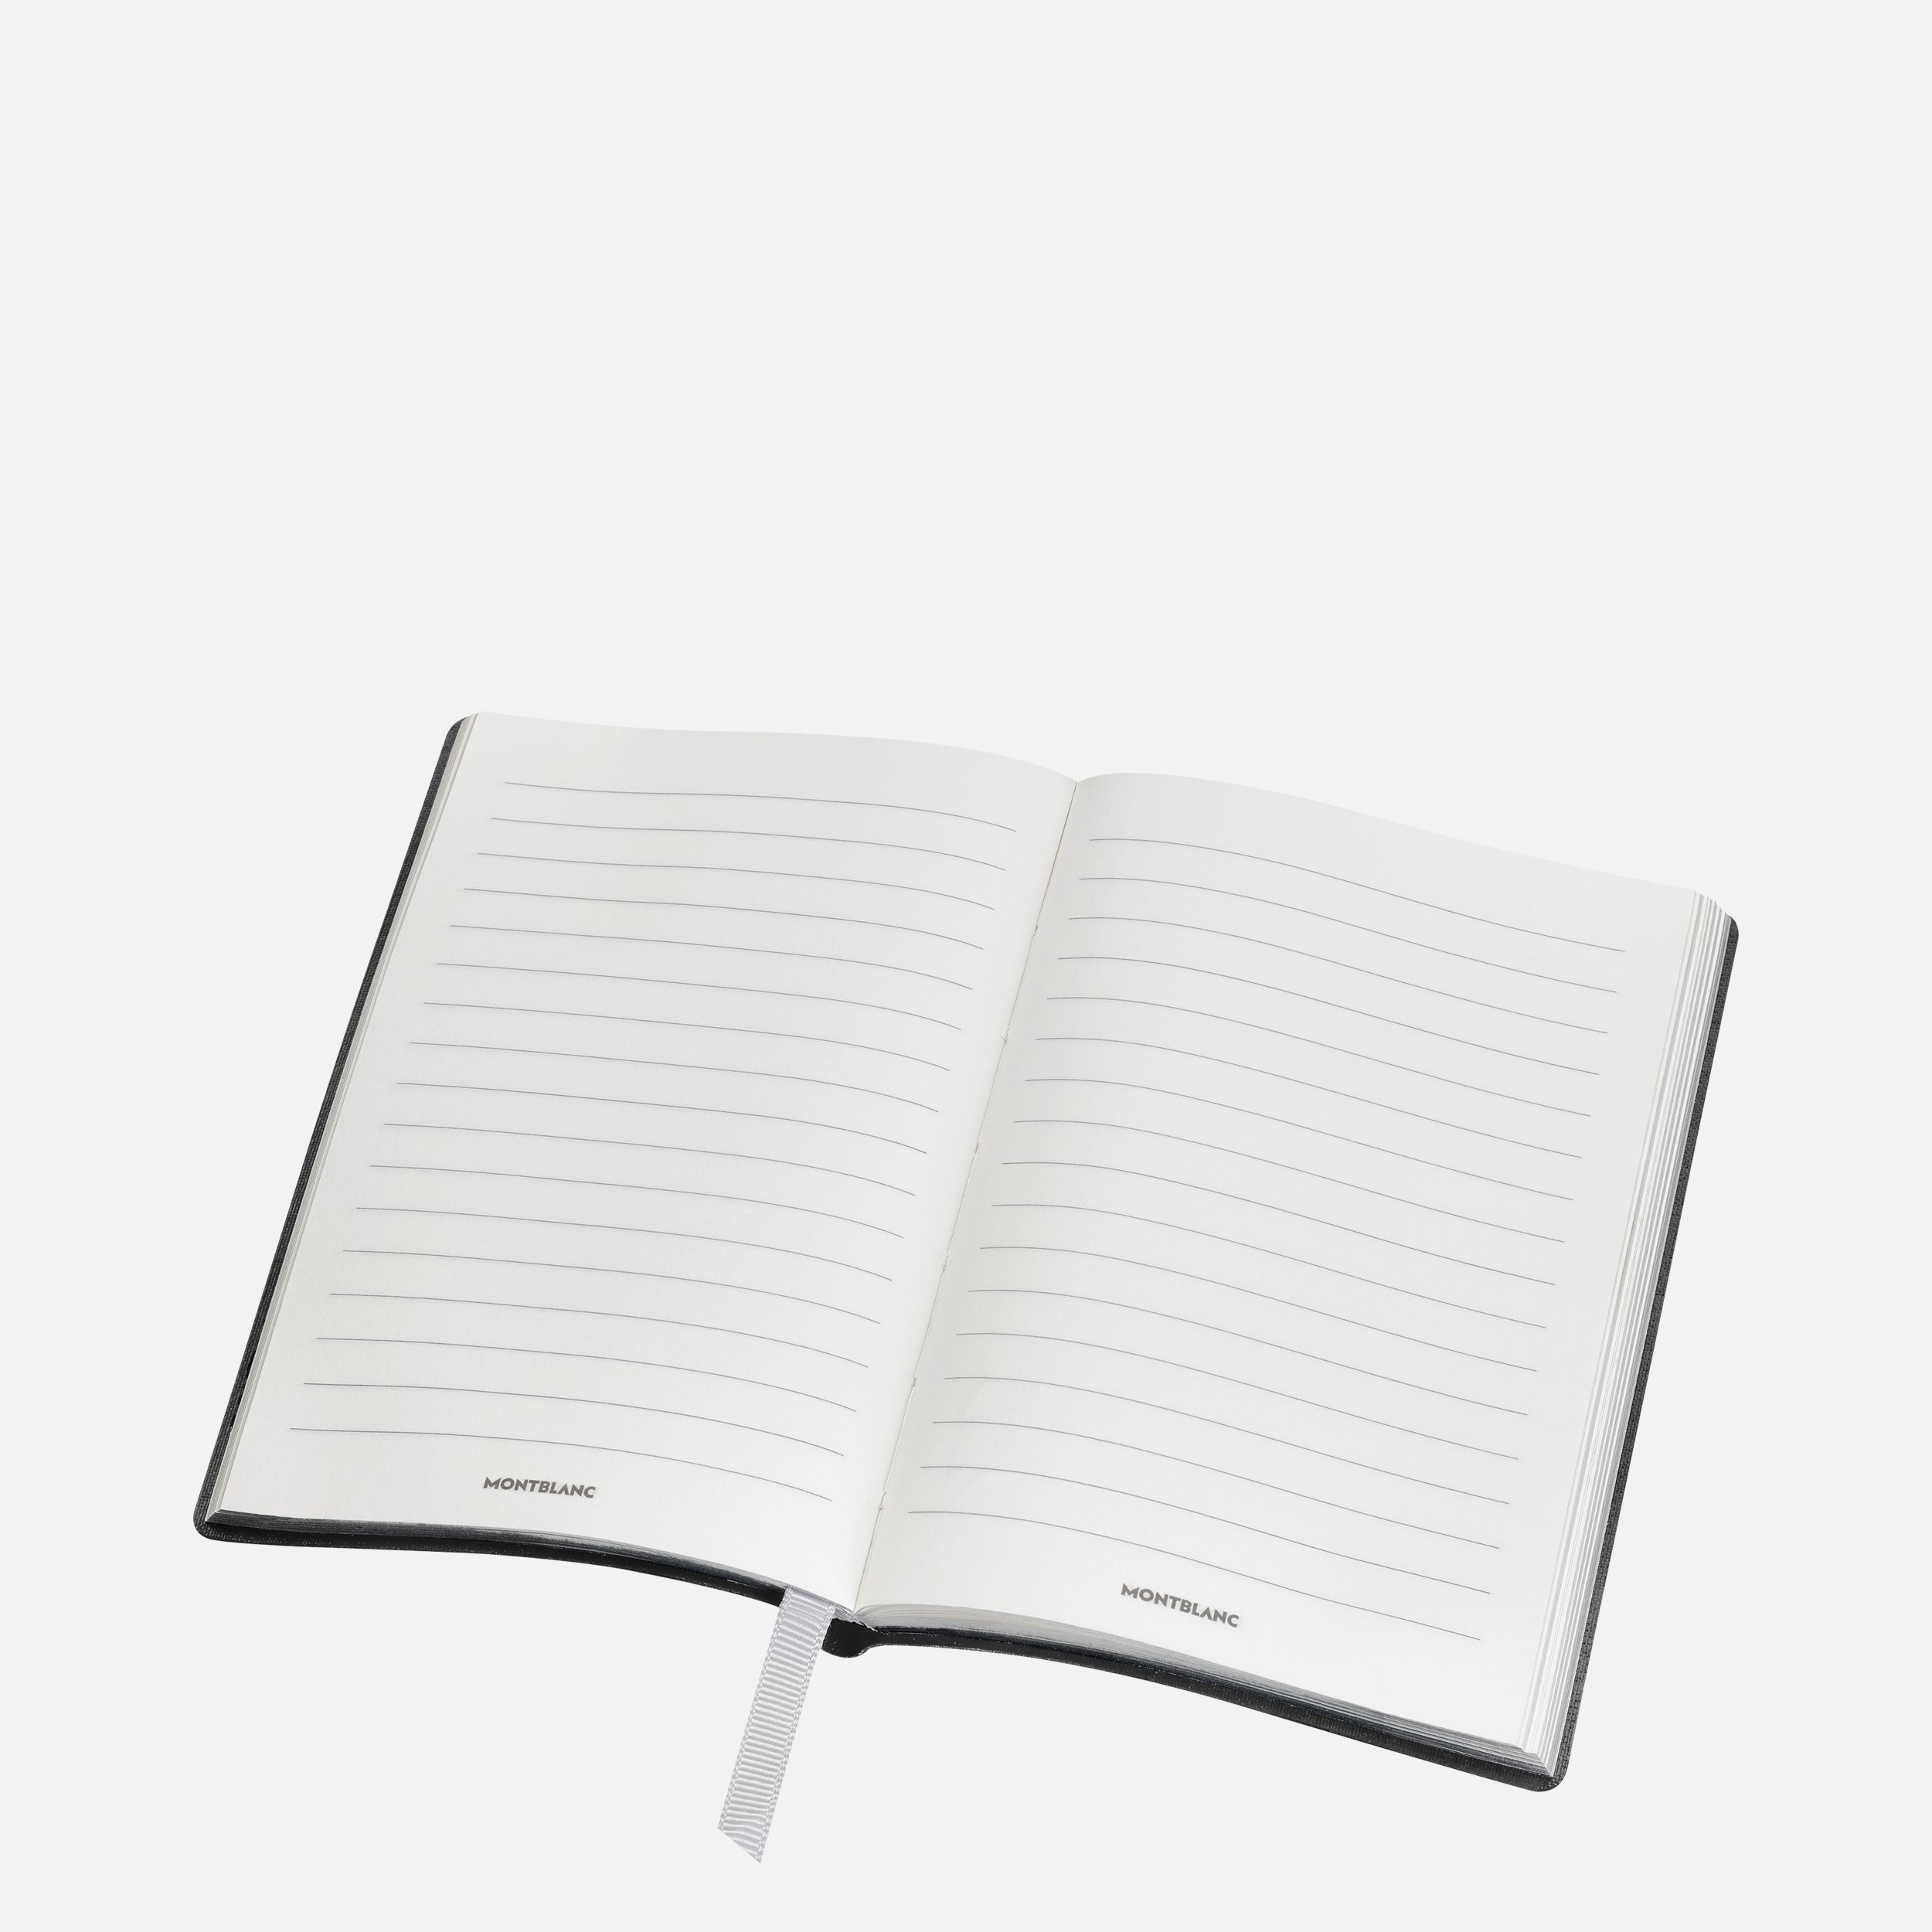 Montblanc Fine Stationery Notebook #148 Black, lined - 2